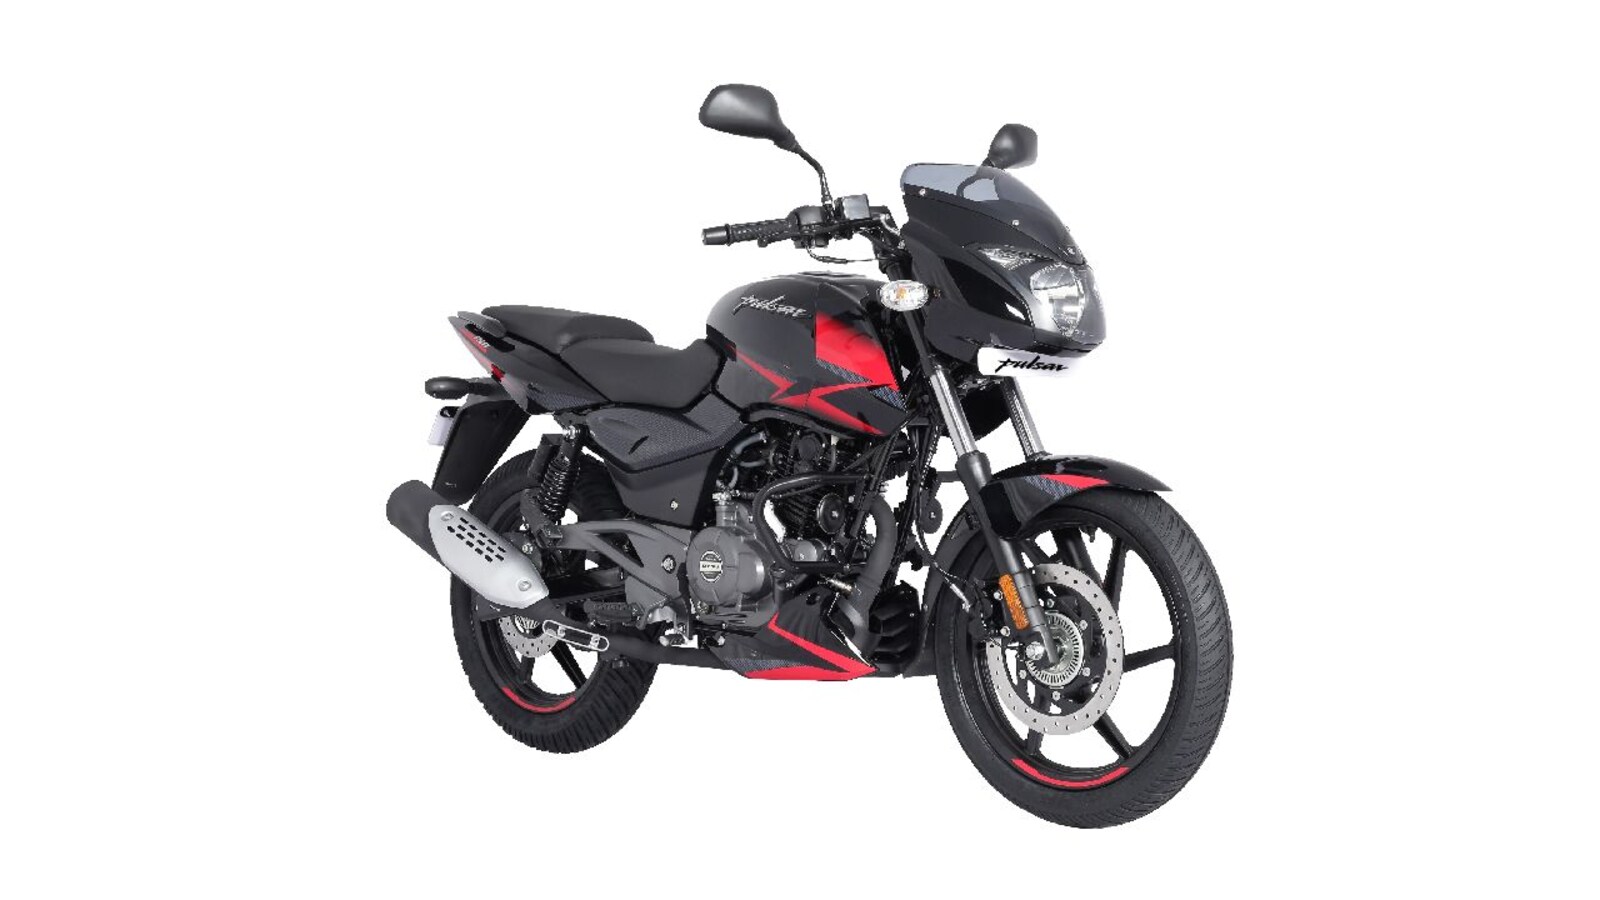 BS-VI Bajaj Pulsar 150 launched with price hike; gets fuel injection system  as upgrade